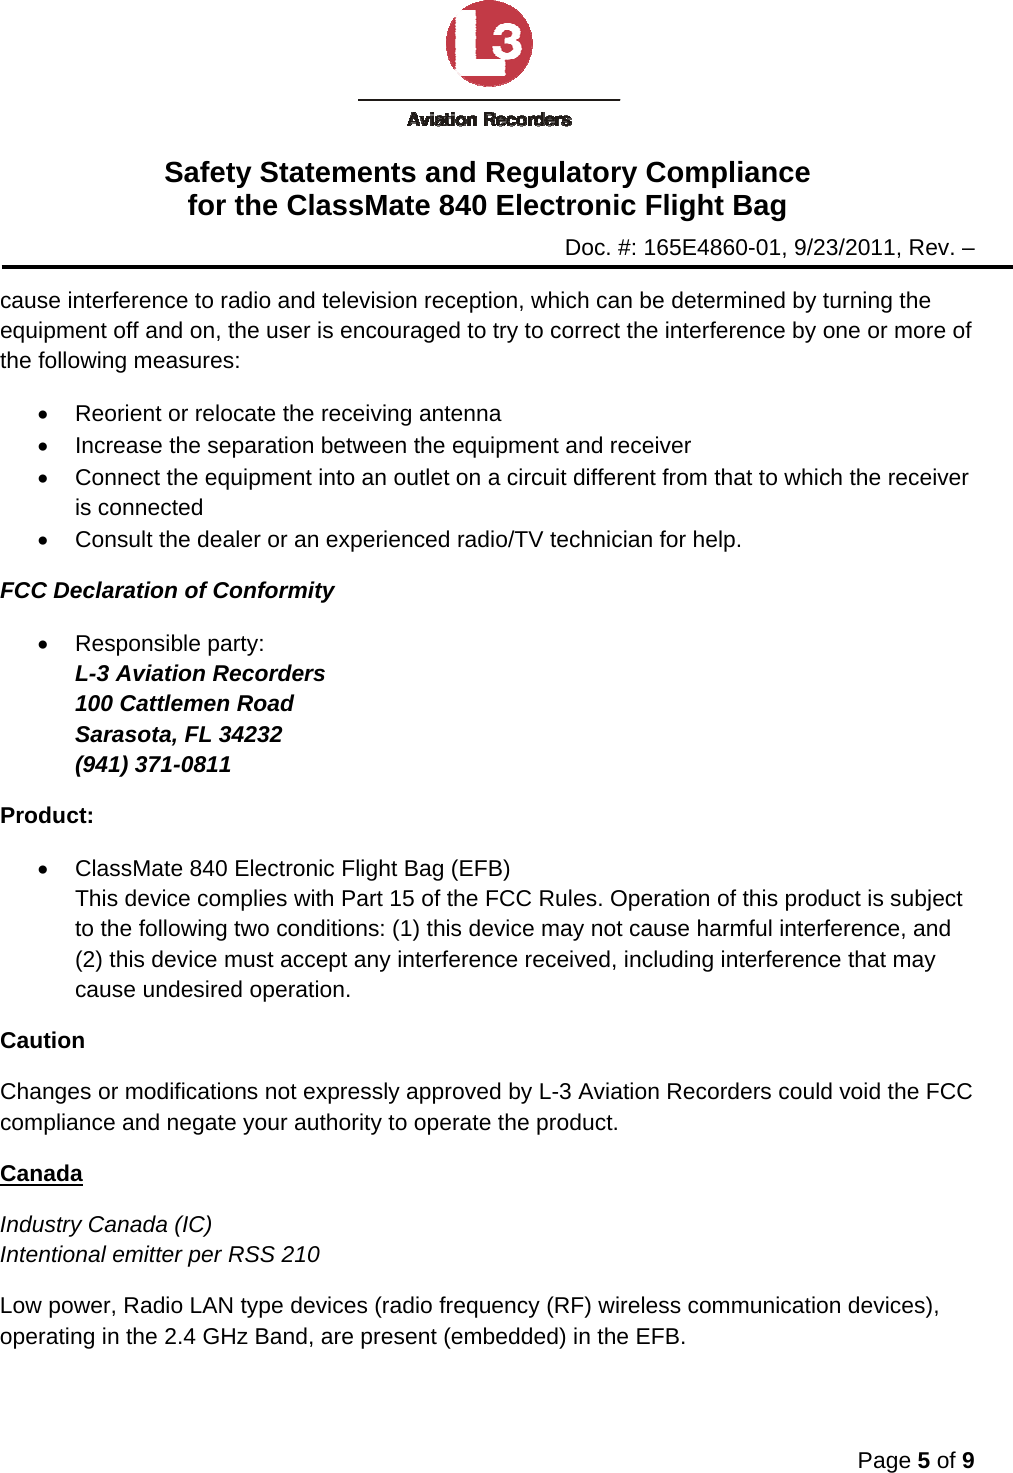 Safety Statements and Regulatory Compliance for the ClassMate 840 Electronic Flight Bag Doc. #: 165E4860-01, 9/23/2011, Rev. –  Page 5 of 9  cause interference to radio and television reception, which can be determined by turning the equipment off and on, the user is encouraged to try to correct the interference by one or more of the following measures: •  Reorient or relocate the receiving antenna •  Increase the separation between the equipment and receiver •  Connect the equipment into an outlet on a circuit different from that to which the receiver is connected •  Consult the dealer or an experienced radio/TV technician for help. FCC Declaration of Conformity • Responsible party: L-3 Aviation Recorders 100 Cattlemen Road Sarasota, FL 34232 (941) 371-0811 Product: •  ClassMate 840 Electronic Flight Bag (EFB) This device complies with Part 15 of the FCC Rules. Operation of this product is subject to the following two conditions: (1) this device may not cause harmful interference, and (2) this device must accept any interference received, including interference that may cause undesired operation. Caution Changes or modifications not expressly approved by L-3 Aviation Recorders could void the FCC compliance and negate your authority to operate the product. Canada Industry Canada (IC) Intentional emitter per RSS 210 Low power, Radio LAN type devices (radio frequency (RF) wireless communication devices), operating in the 2.4 GHz Band, are present (embedded) in the EFB.  